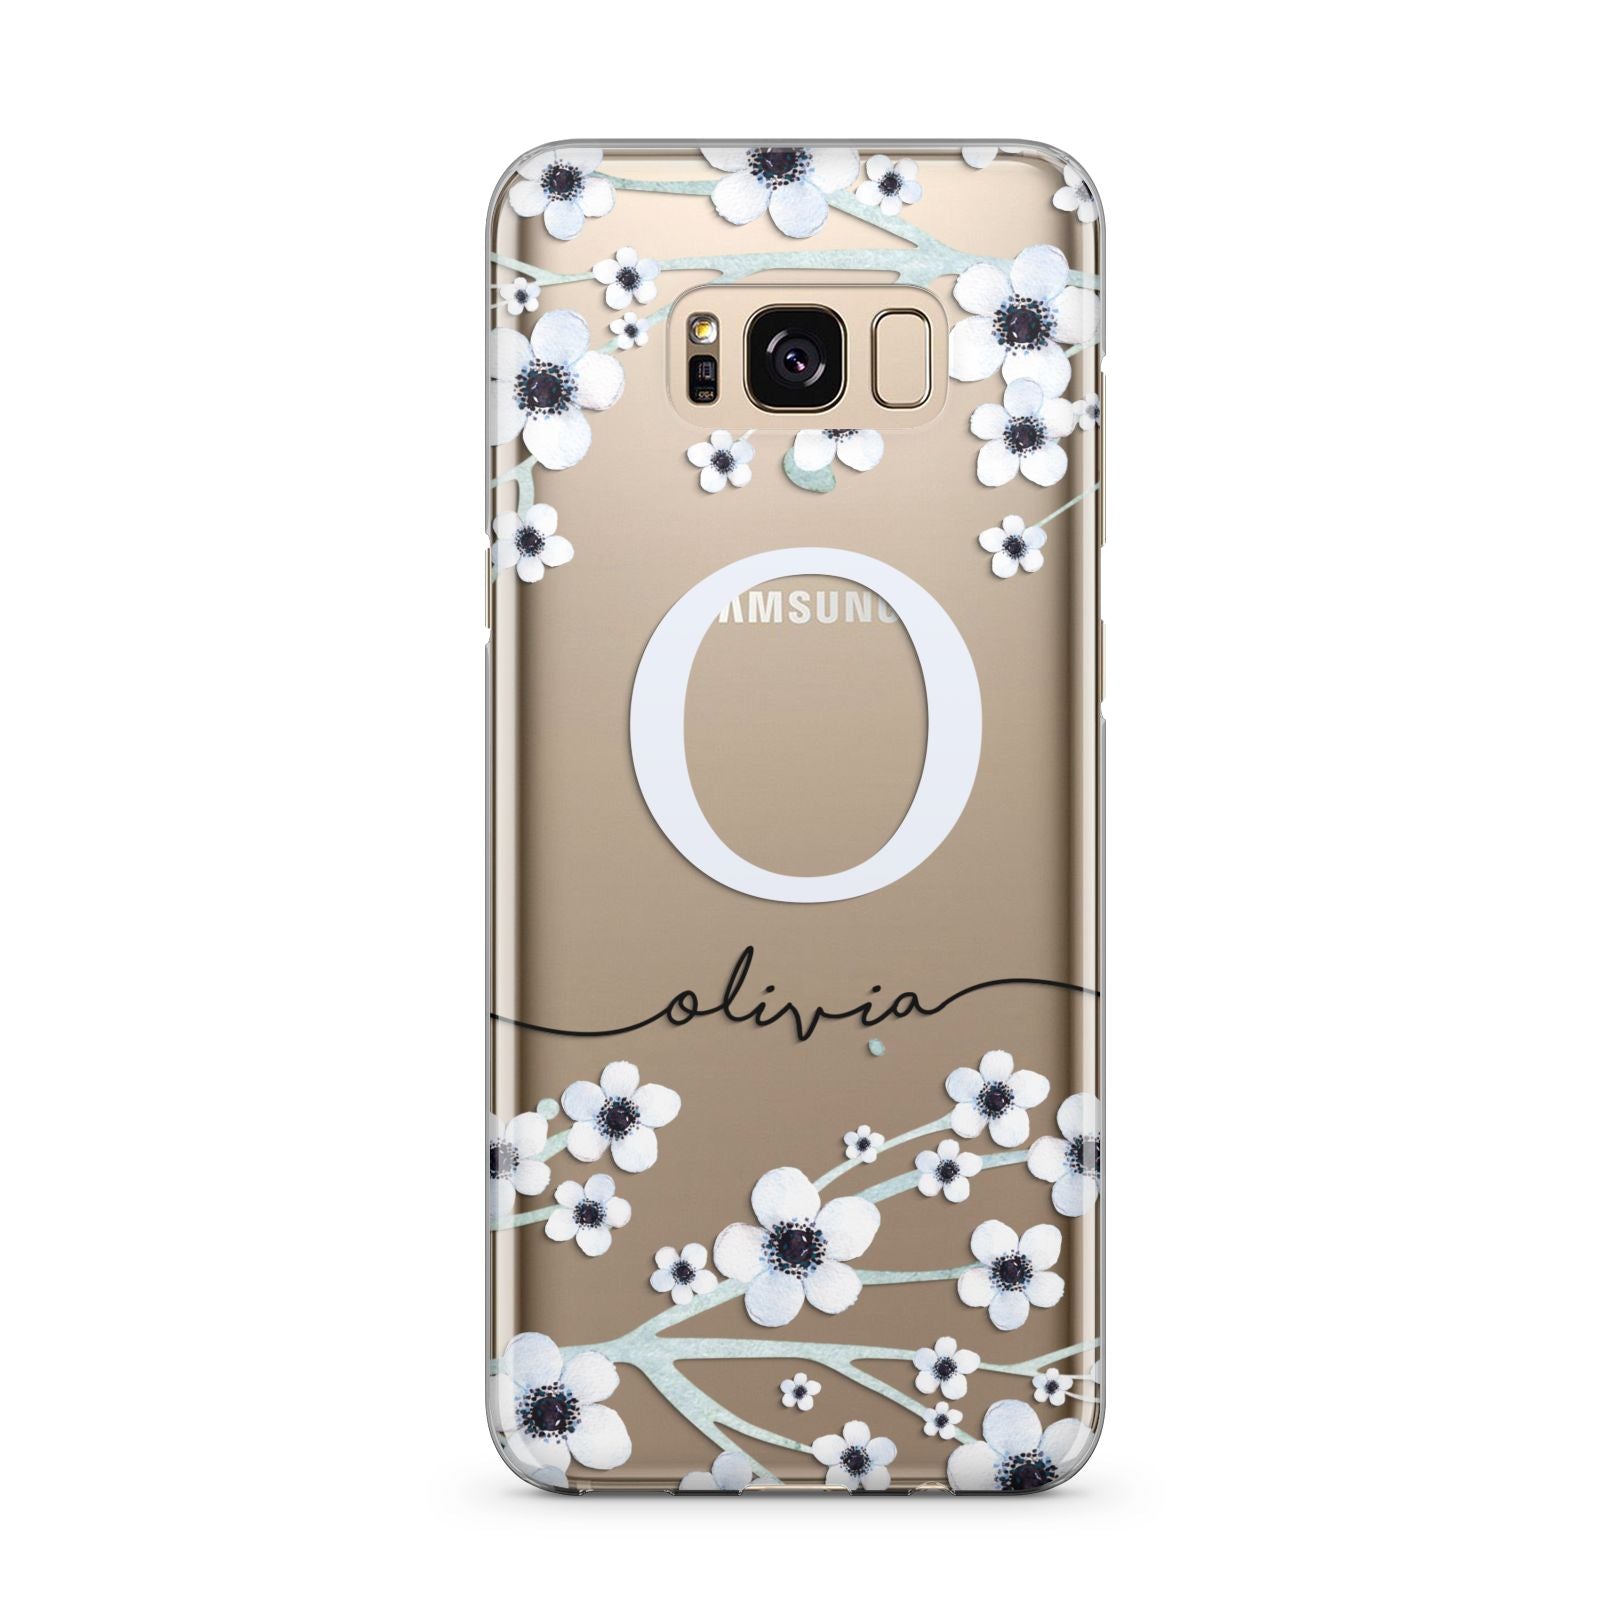 Personalised White Flower Samsung Galaxy S8 Plus Case